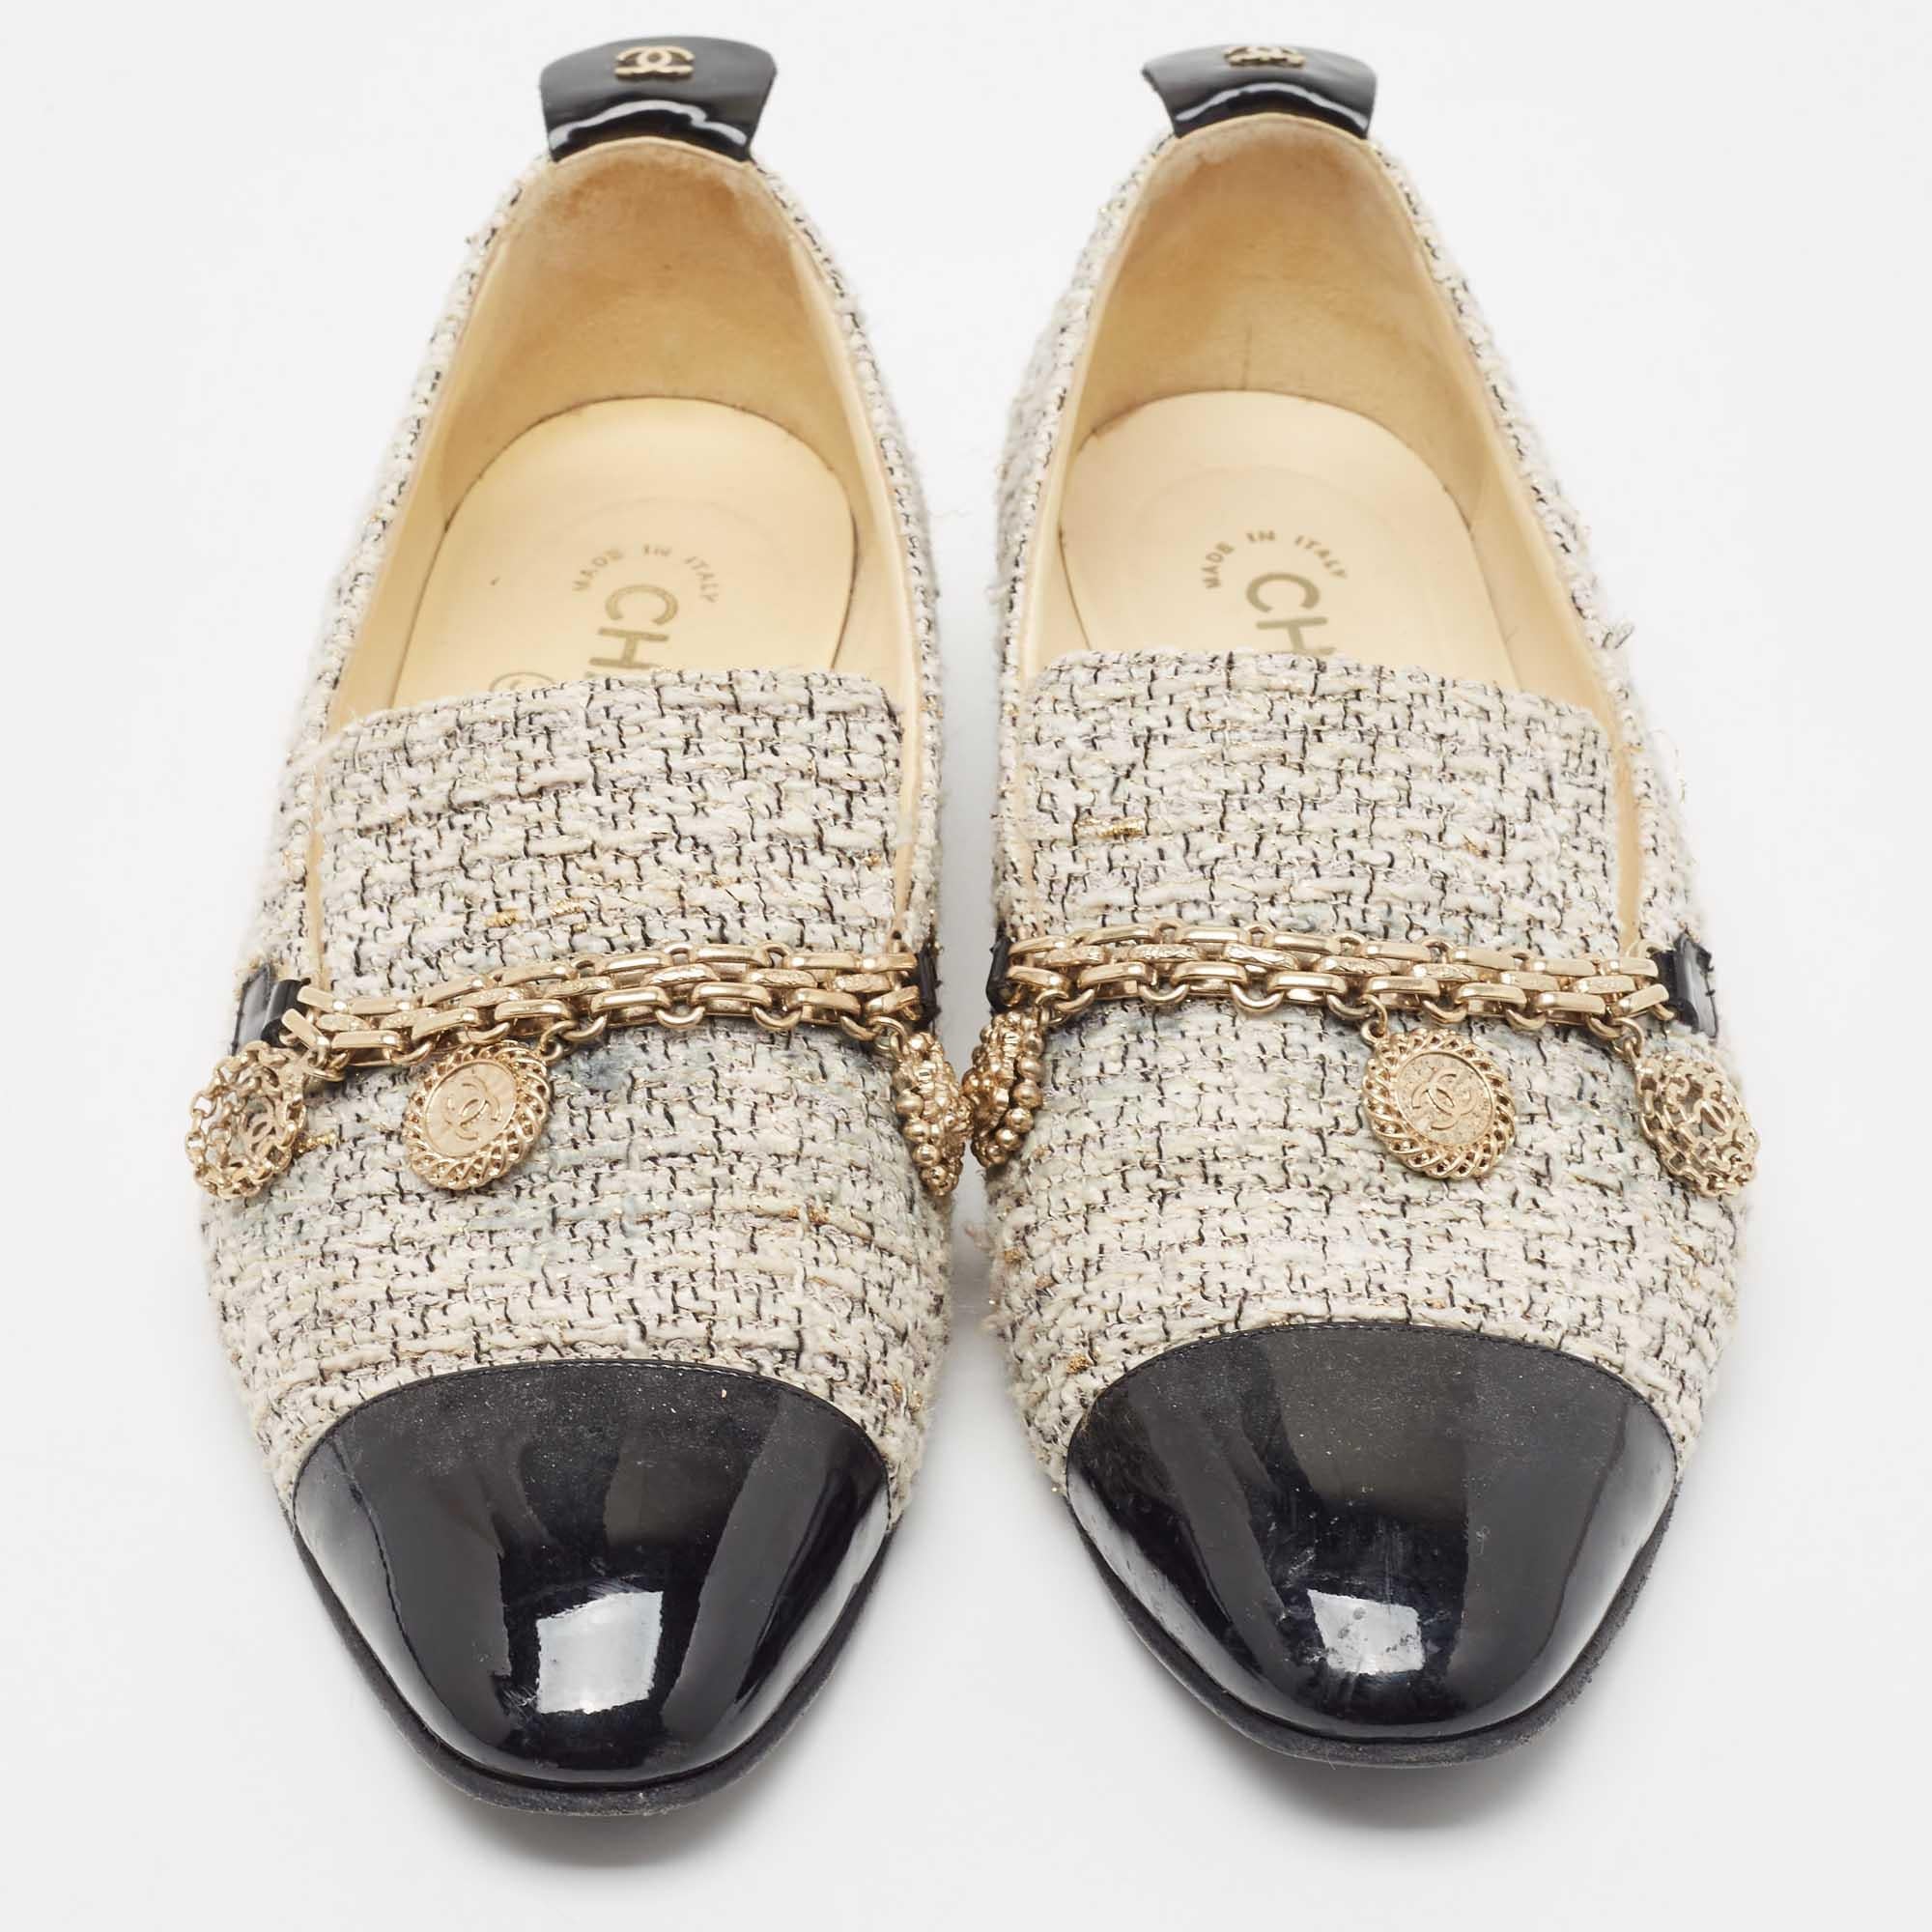 Practical, fashionable, and durable—these Chanel loafers are carefully built to be fine companions to your everyday style. They come made using the best materials to be a prized buy.

